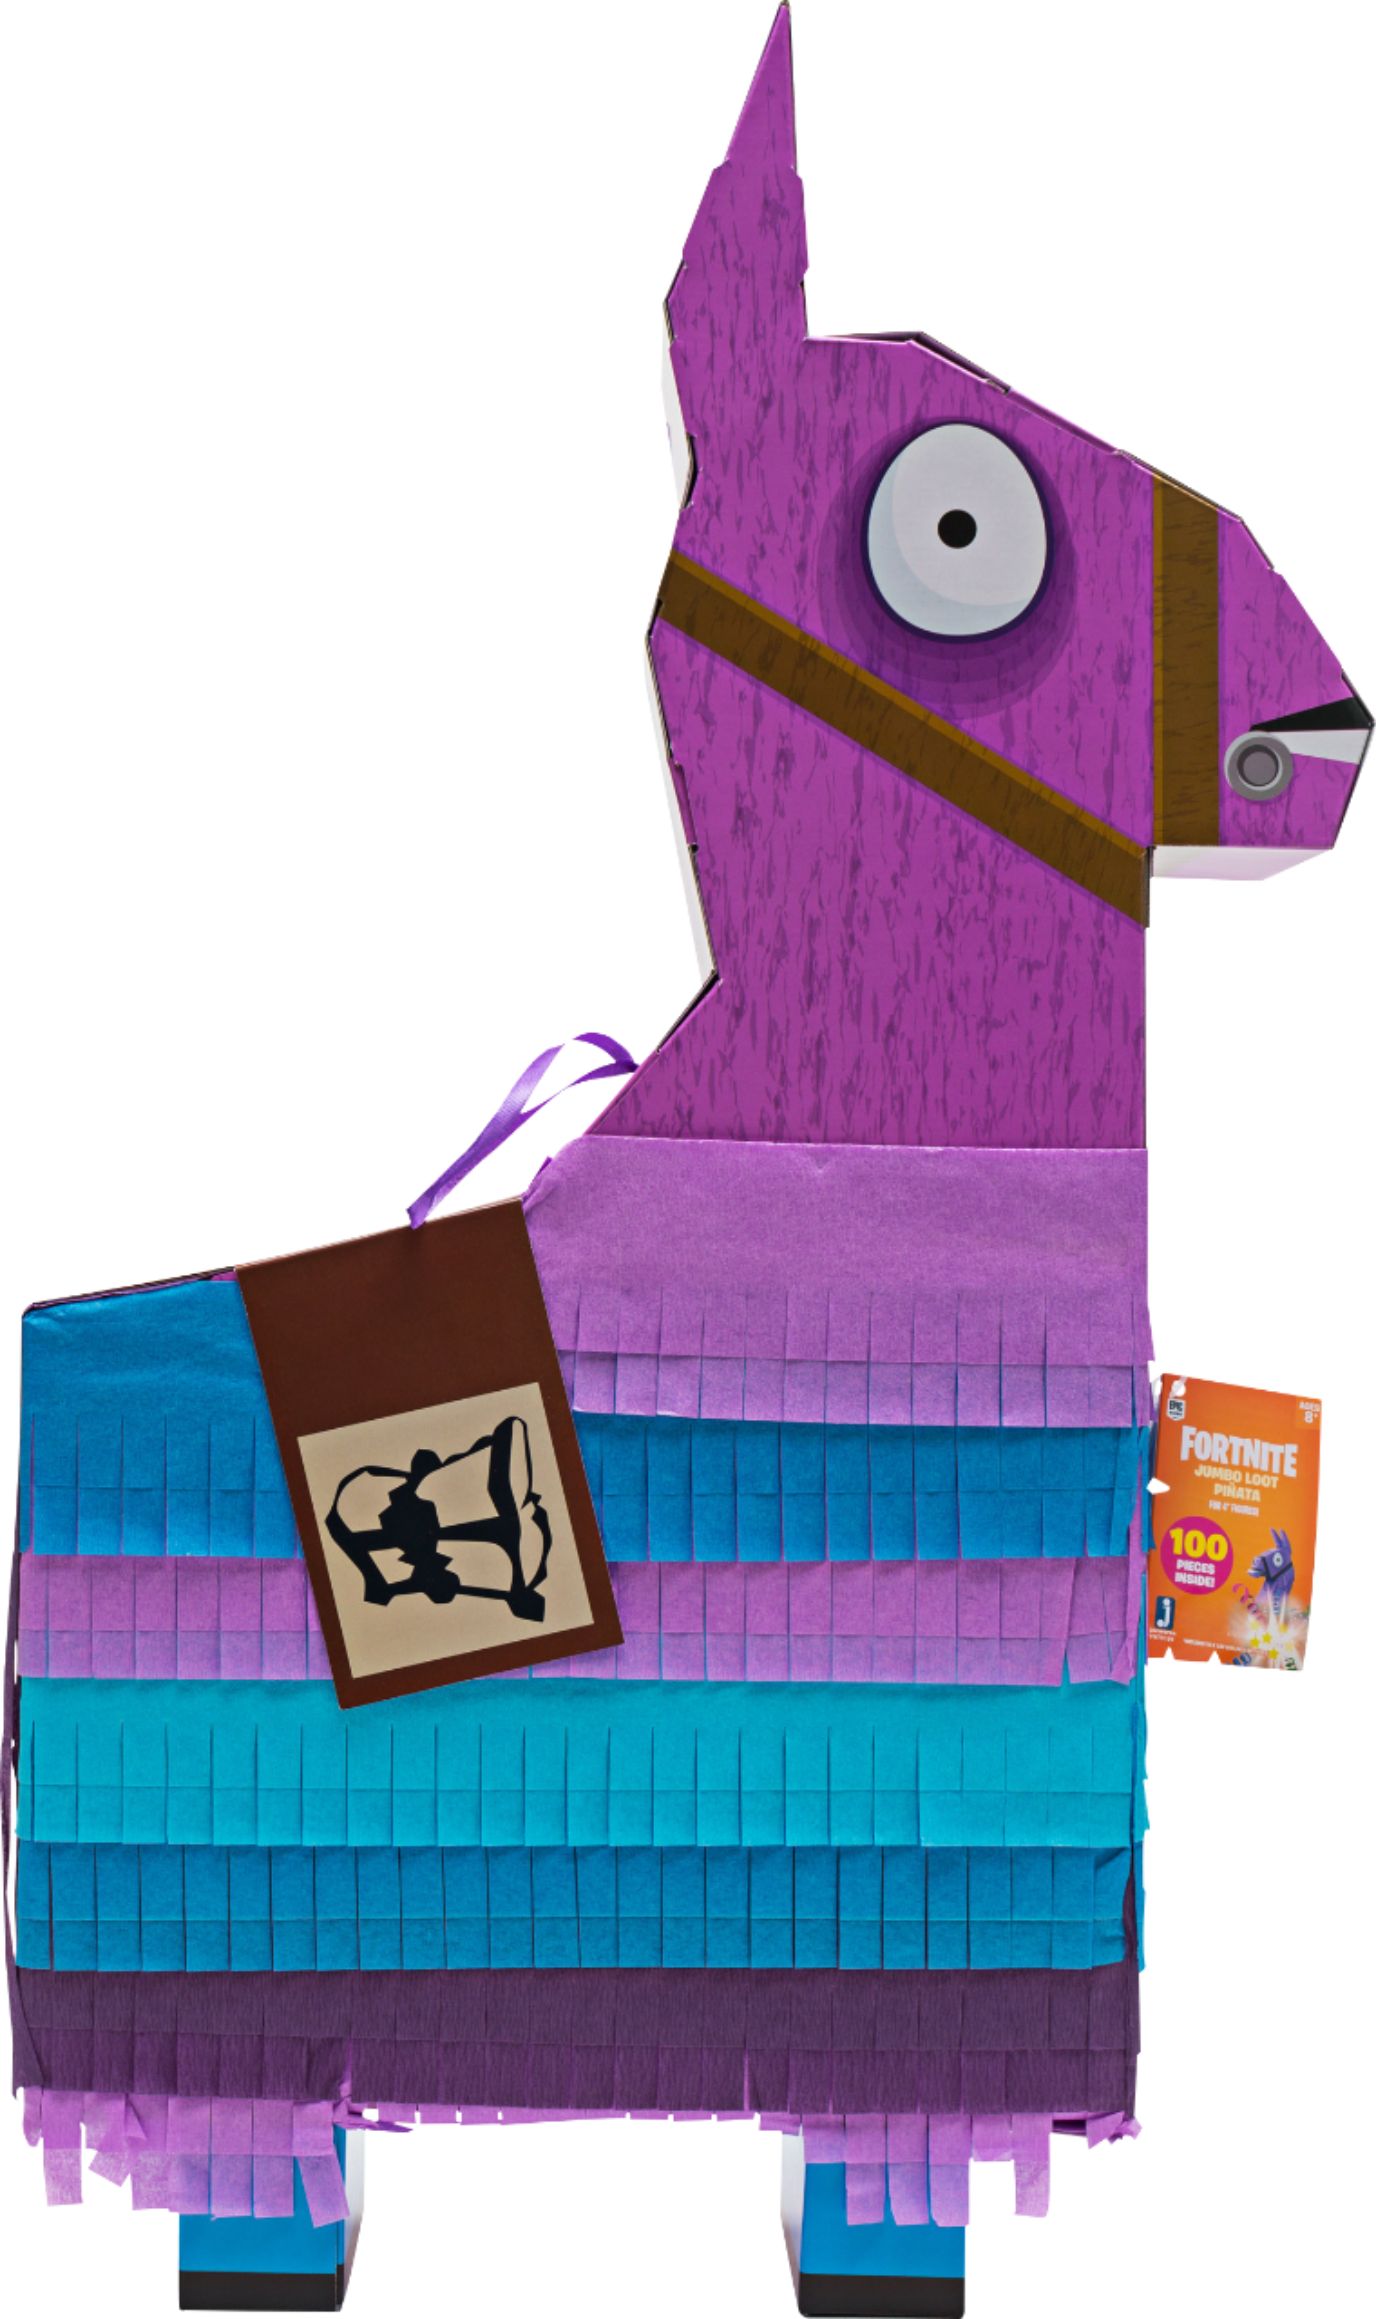  Fortnite Supply Llama, Includes Highly-Detailed and